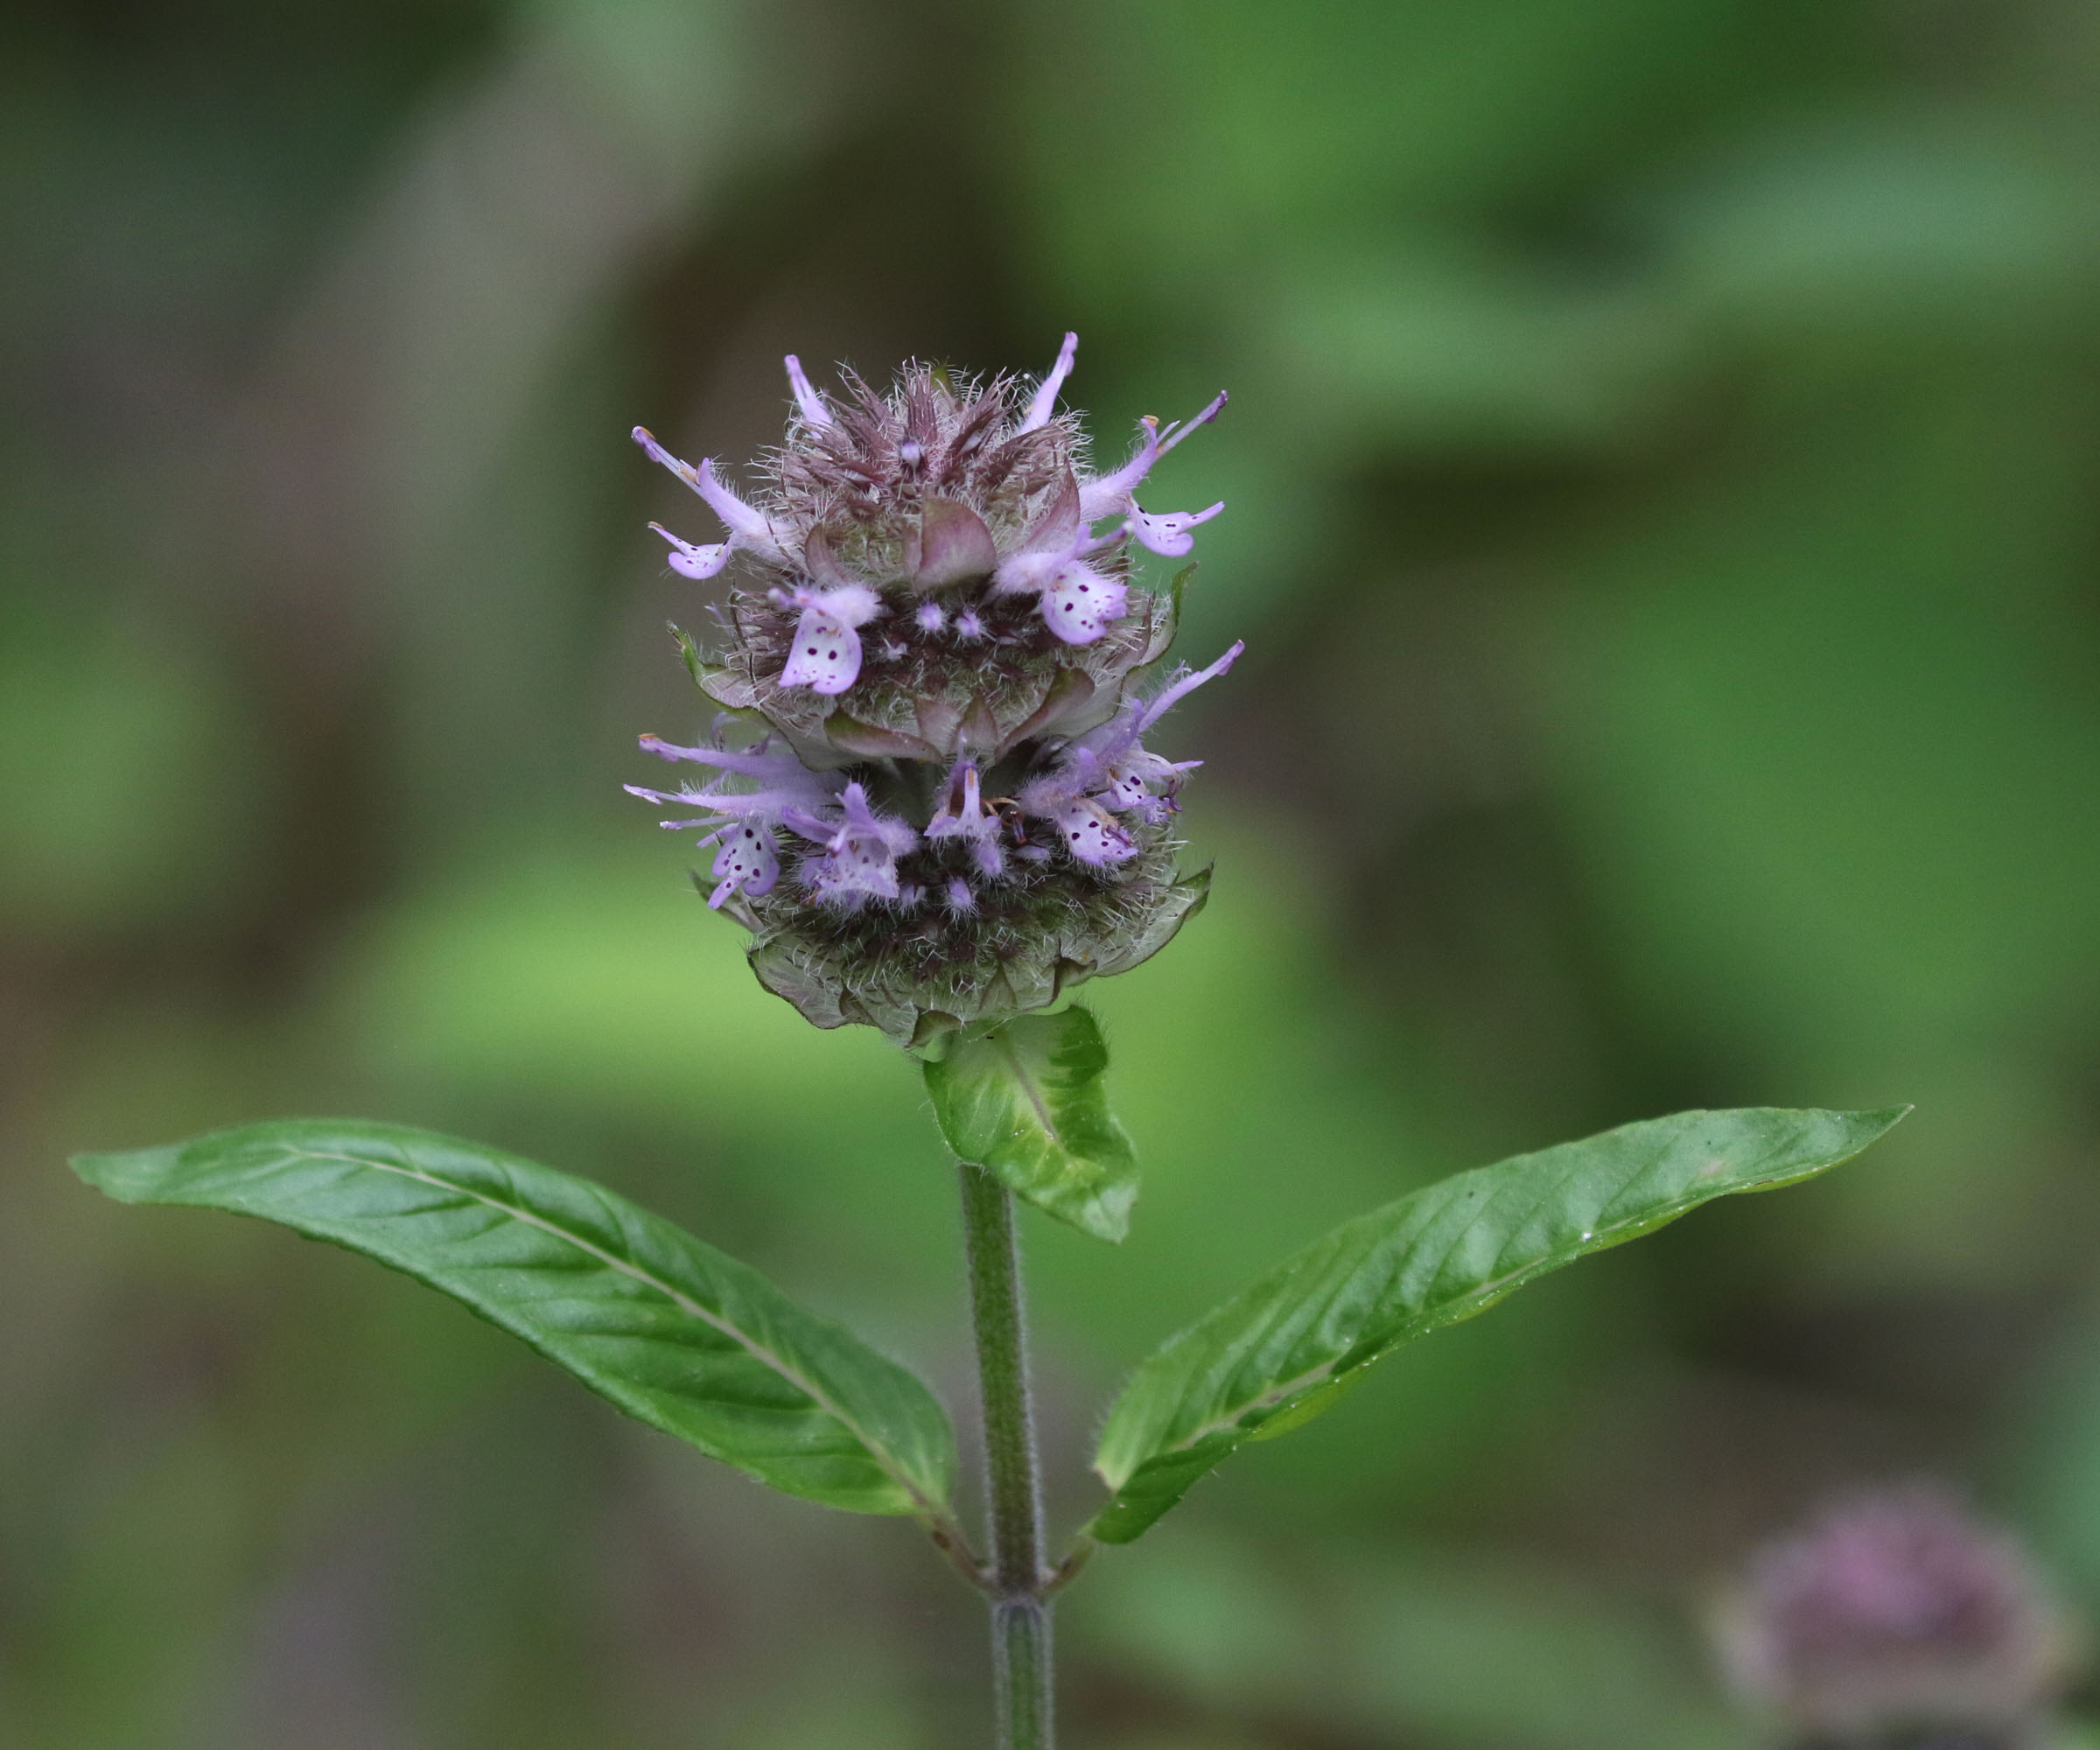 The Scientific Name is Blephilia ciliata. You will likely hear them called Downy Woodmint, Downy Pagoda-plant, Ohio Horsemint. This picture shows the The inflorescence is a tiered array of whorls of small two-lipped lavender flowers stacked like a pagoda. of Blephilia ciliata